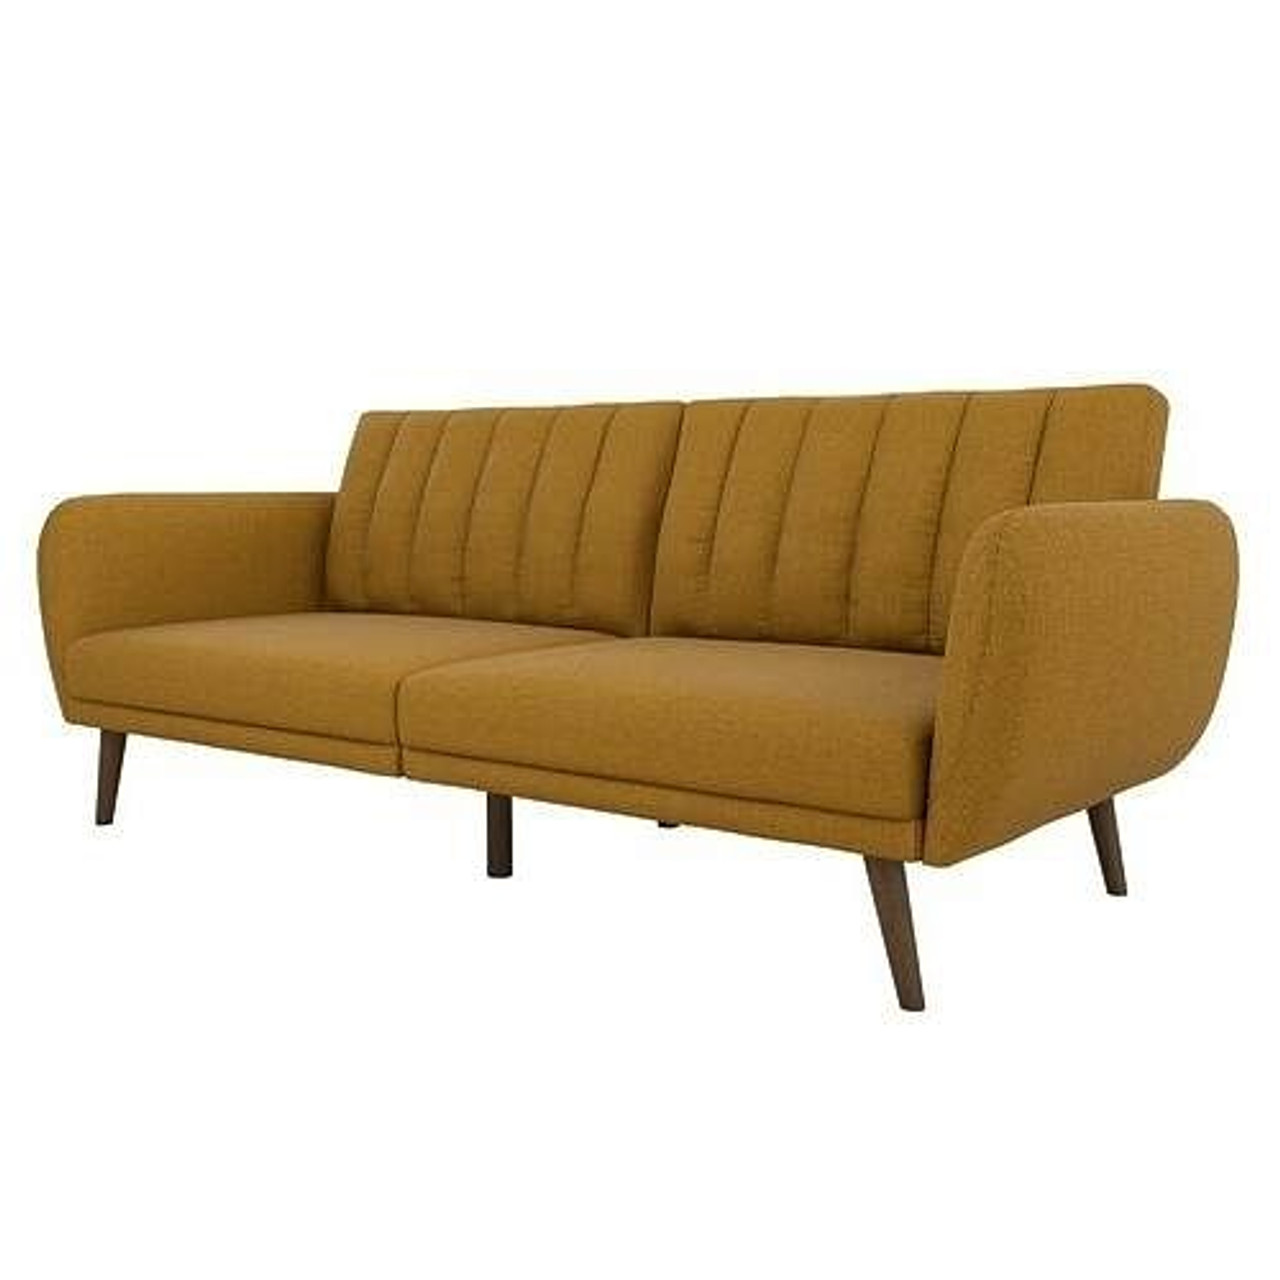 Mustard Linen Upholstered Futon Sofa Bed with Mid-Century Style Wooden Legs